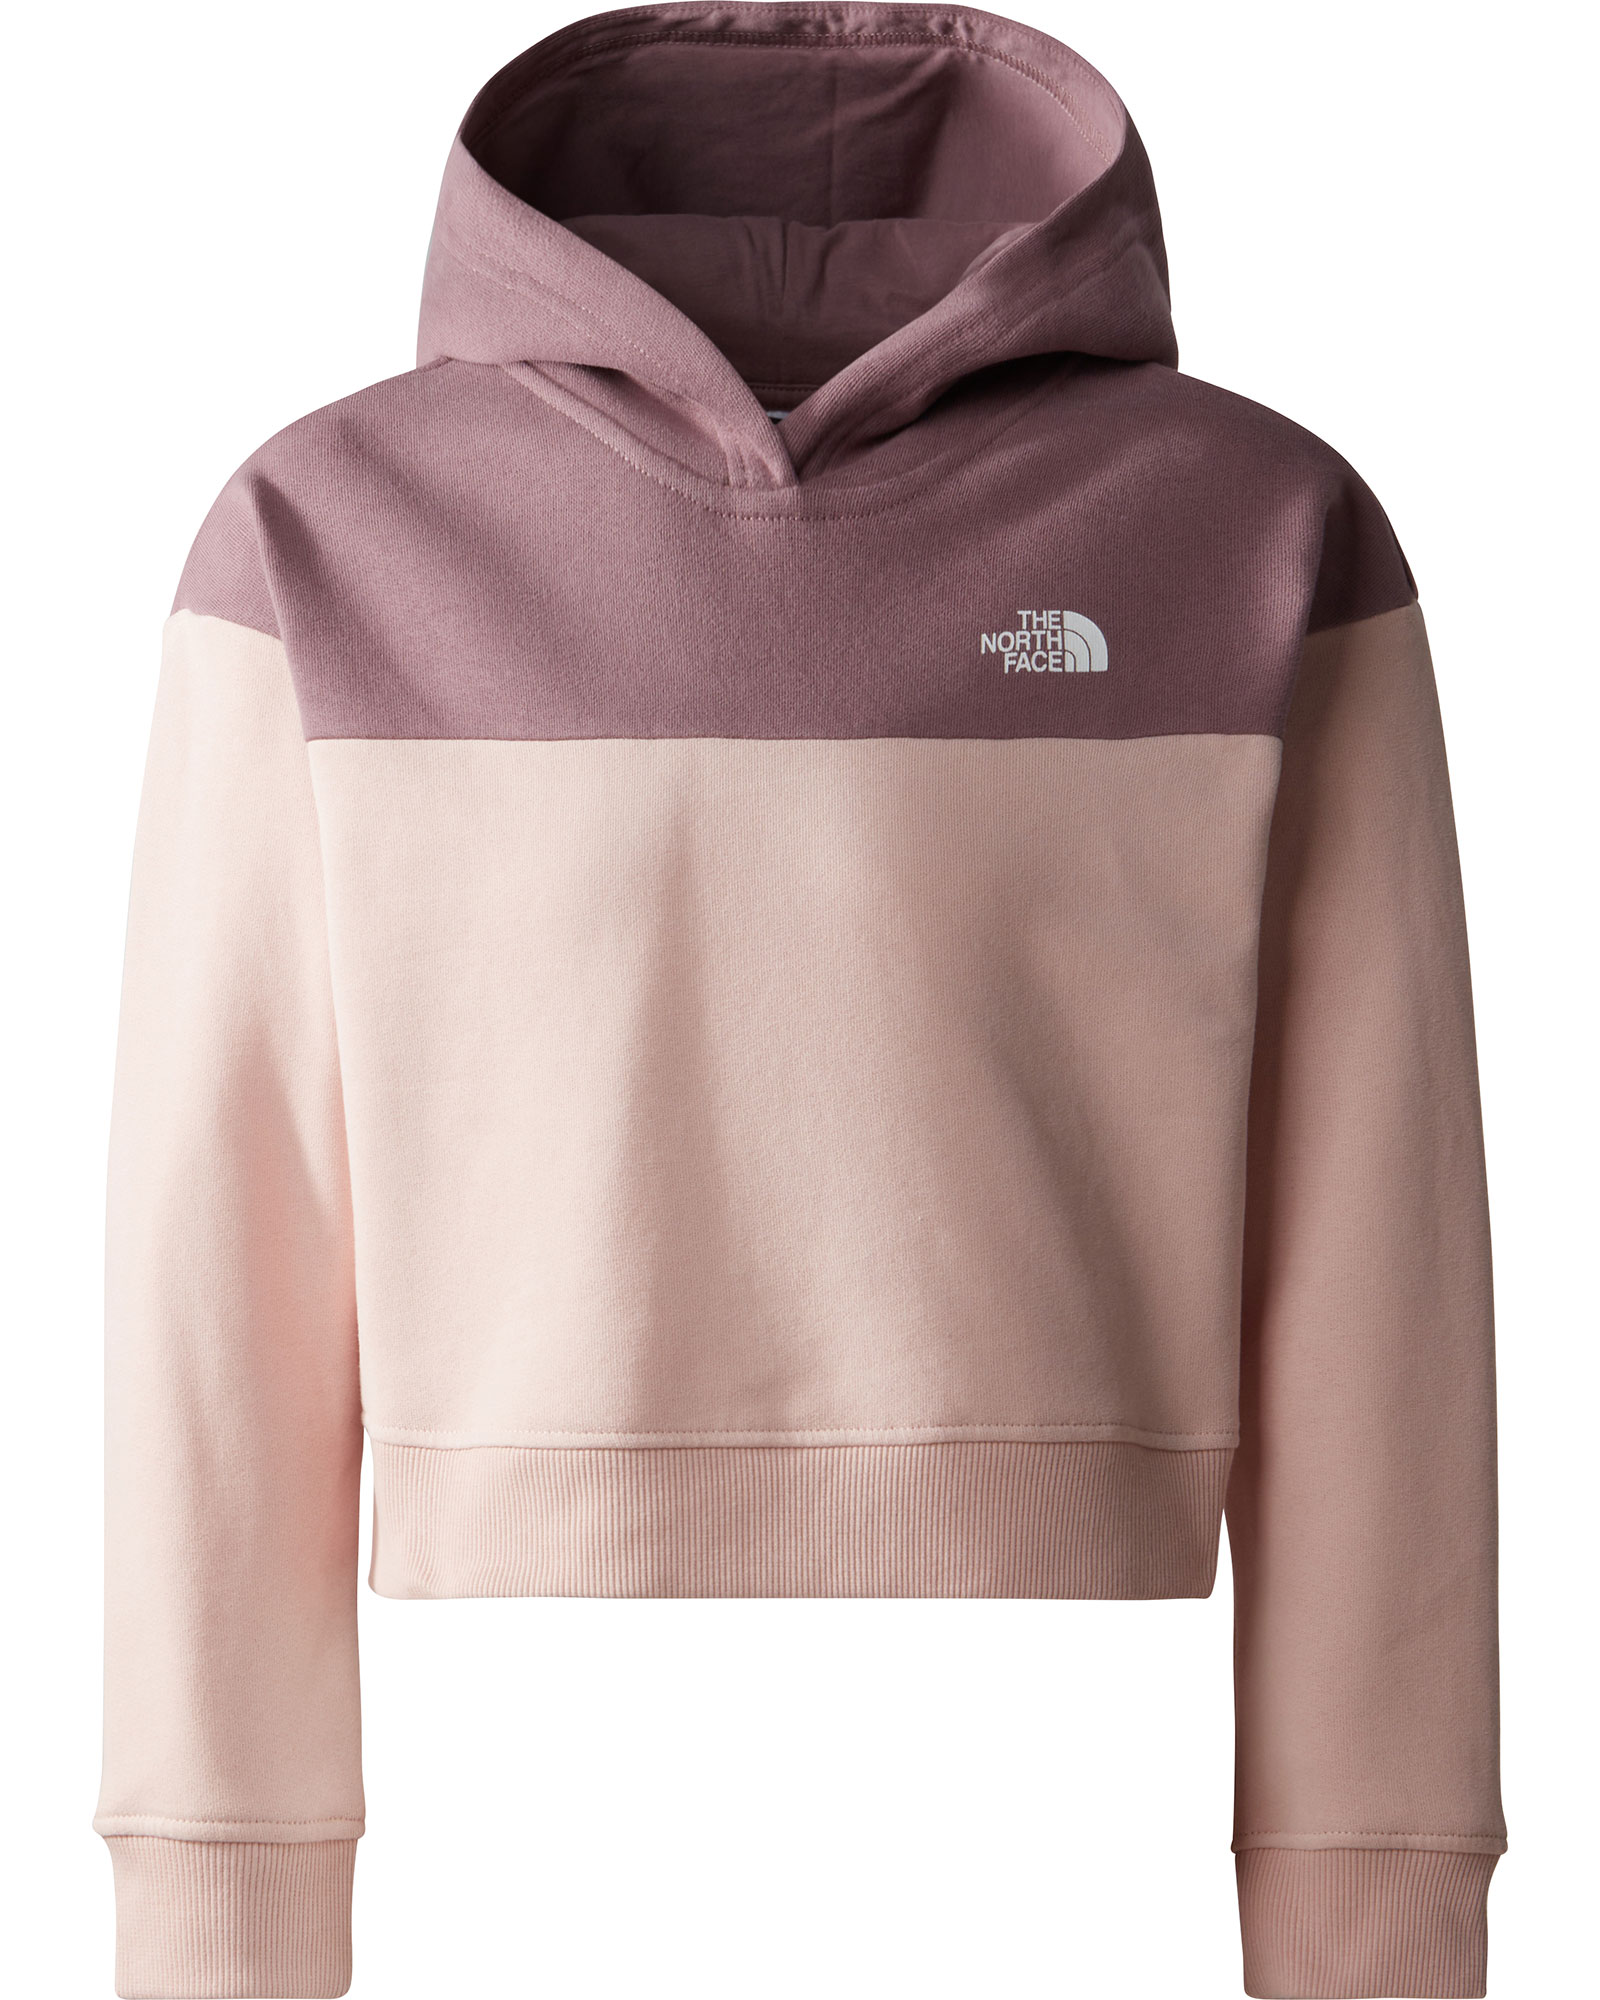 The North Face Girl’s Drew Peak Crop P/O Hoodie XL - Pink Moss-Fawn Grey XL